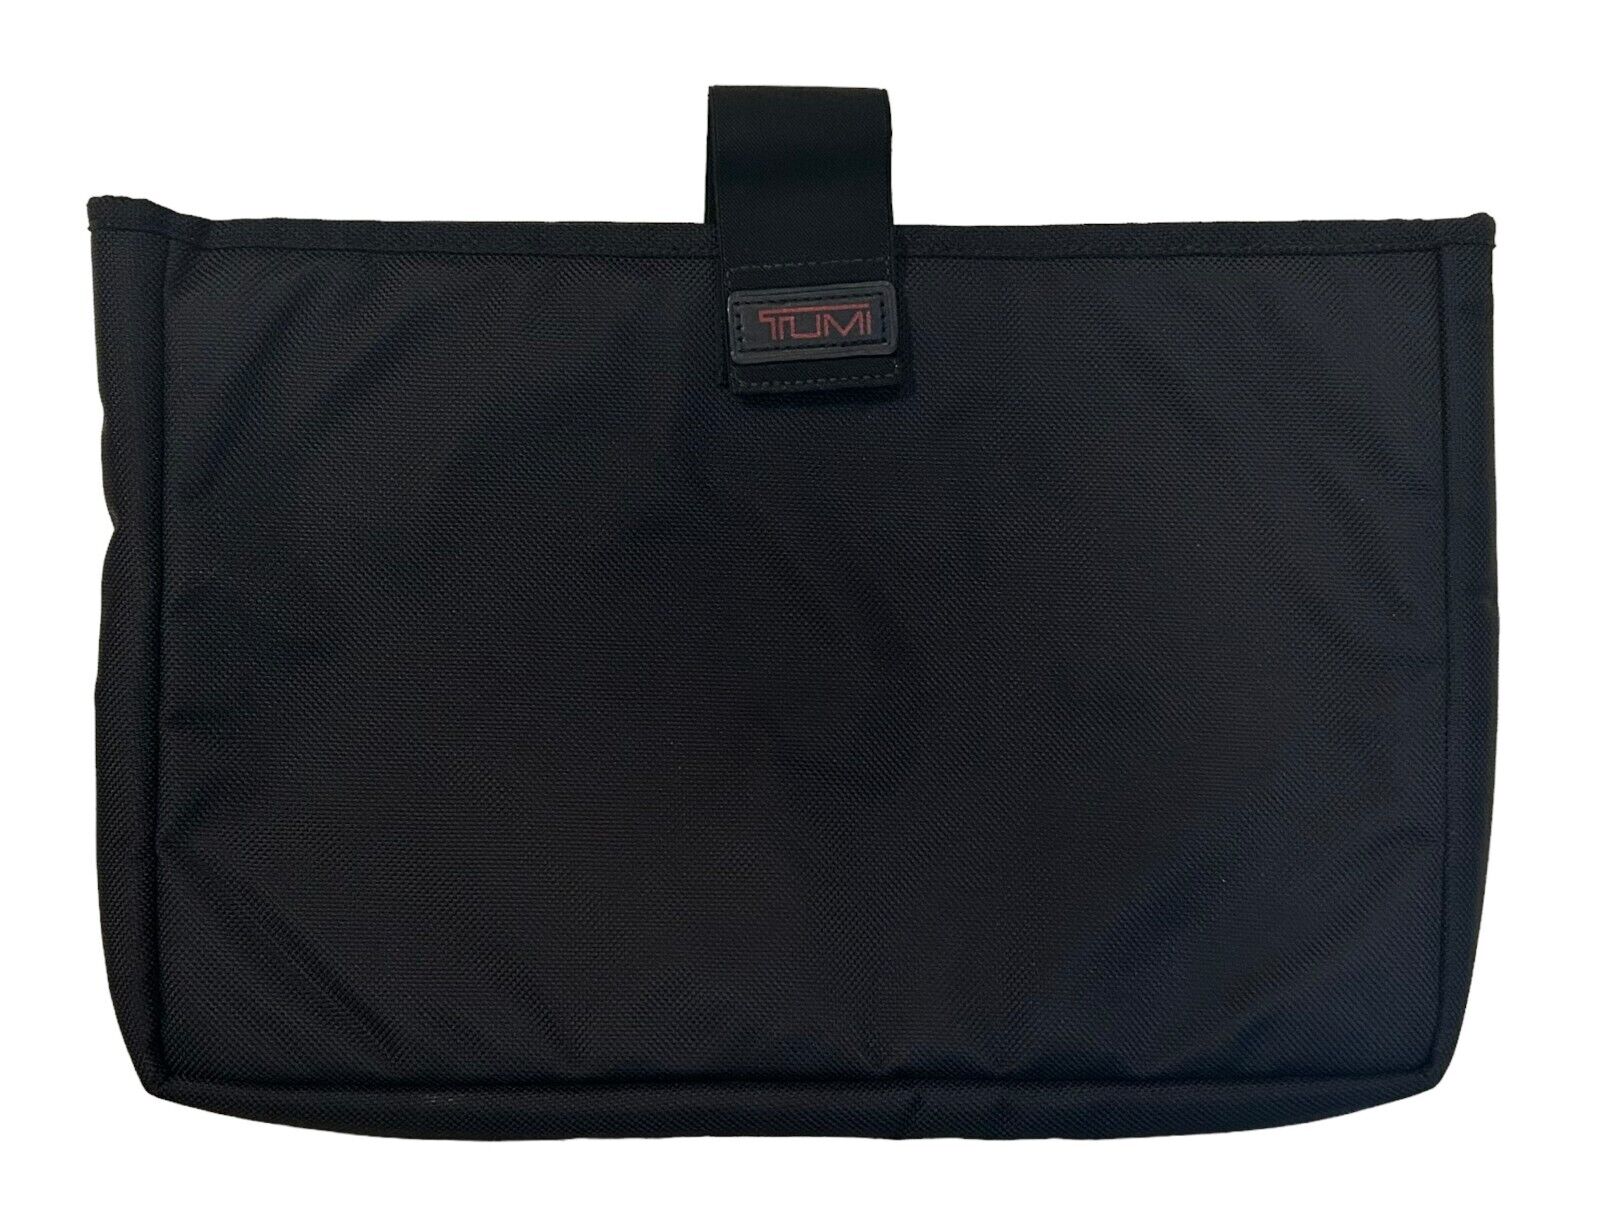 TUMI BLACK PADDED COMPUTER LAPTOP IPAD COVER CARRY CASE BAG